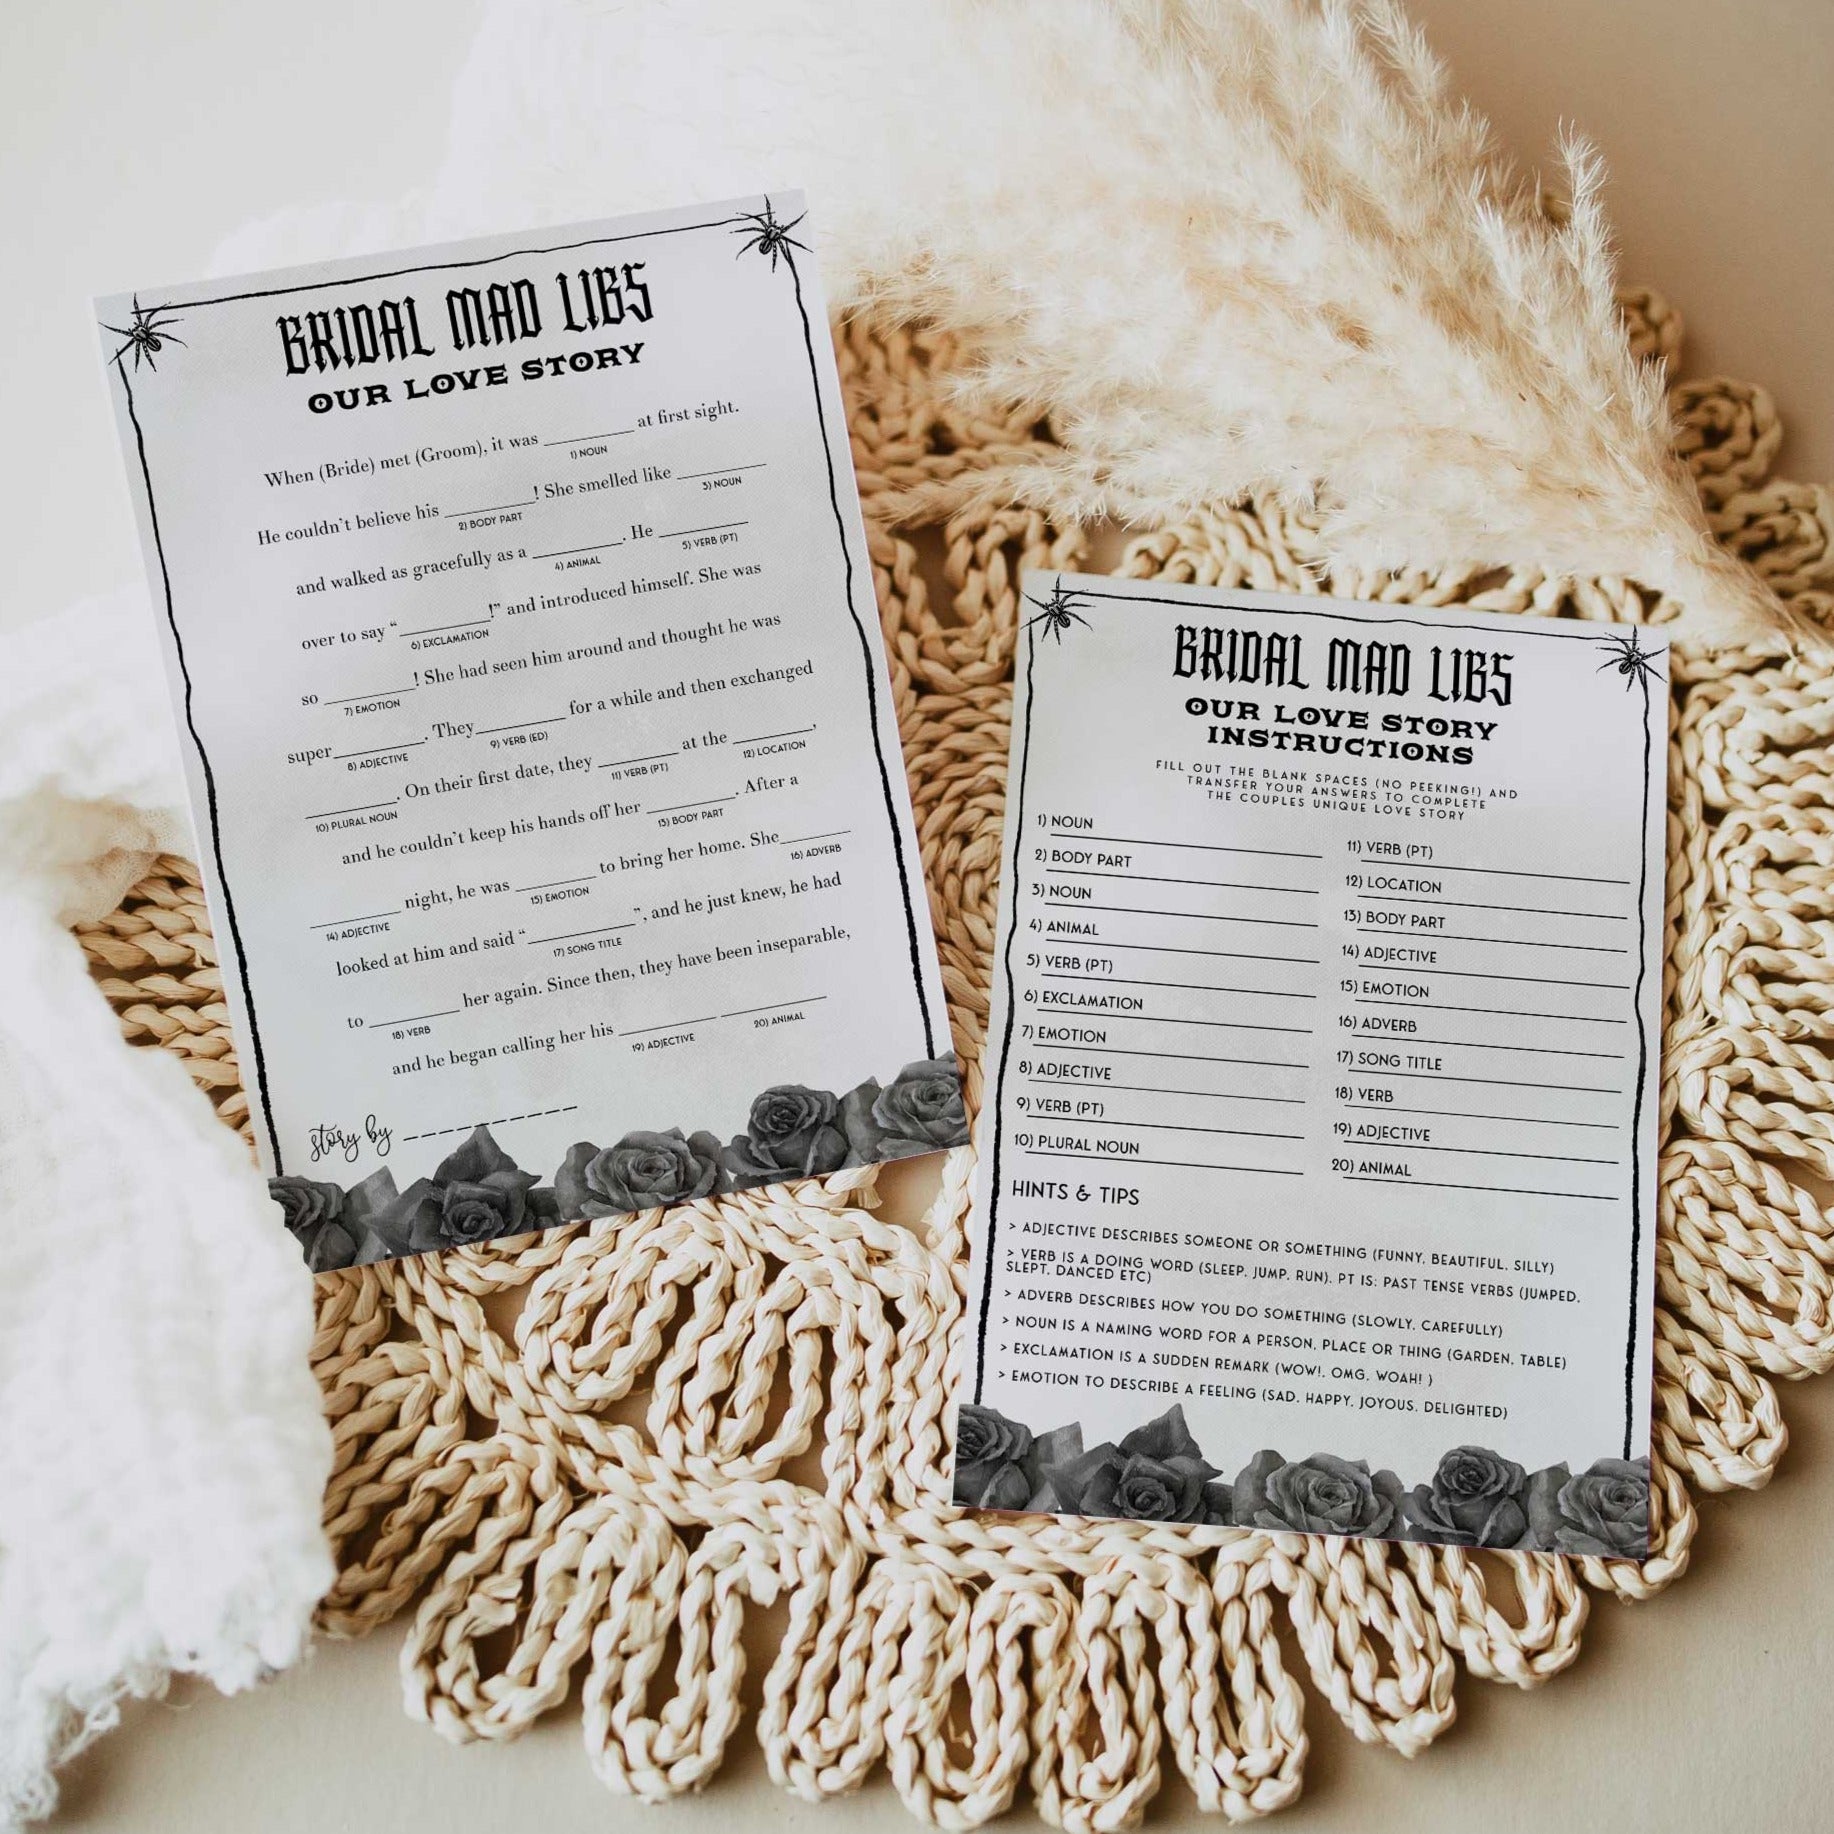 Fully editable and printable bridal shower bridal mad libs love story game with a gothic design. Perfect for a Bride or Die or Death Us To Party bridal shower themed party